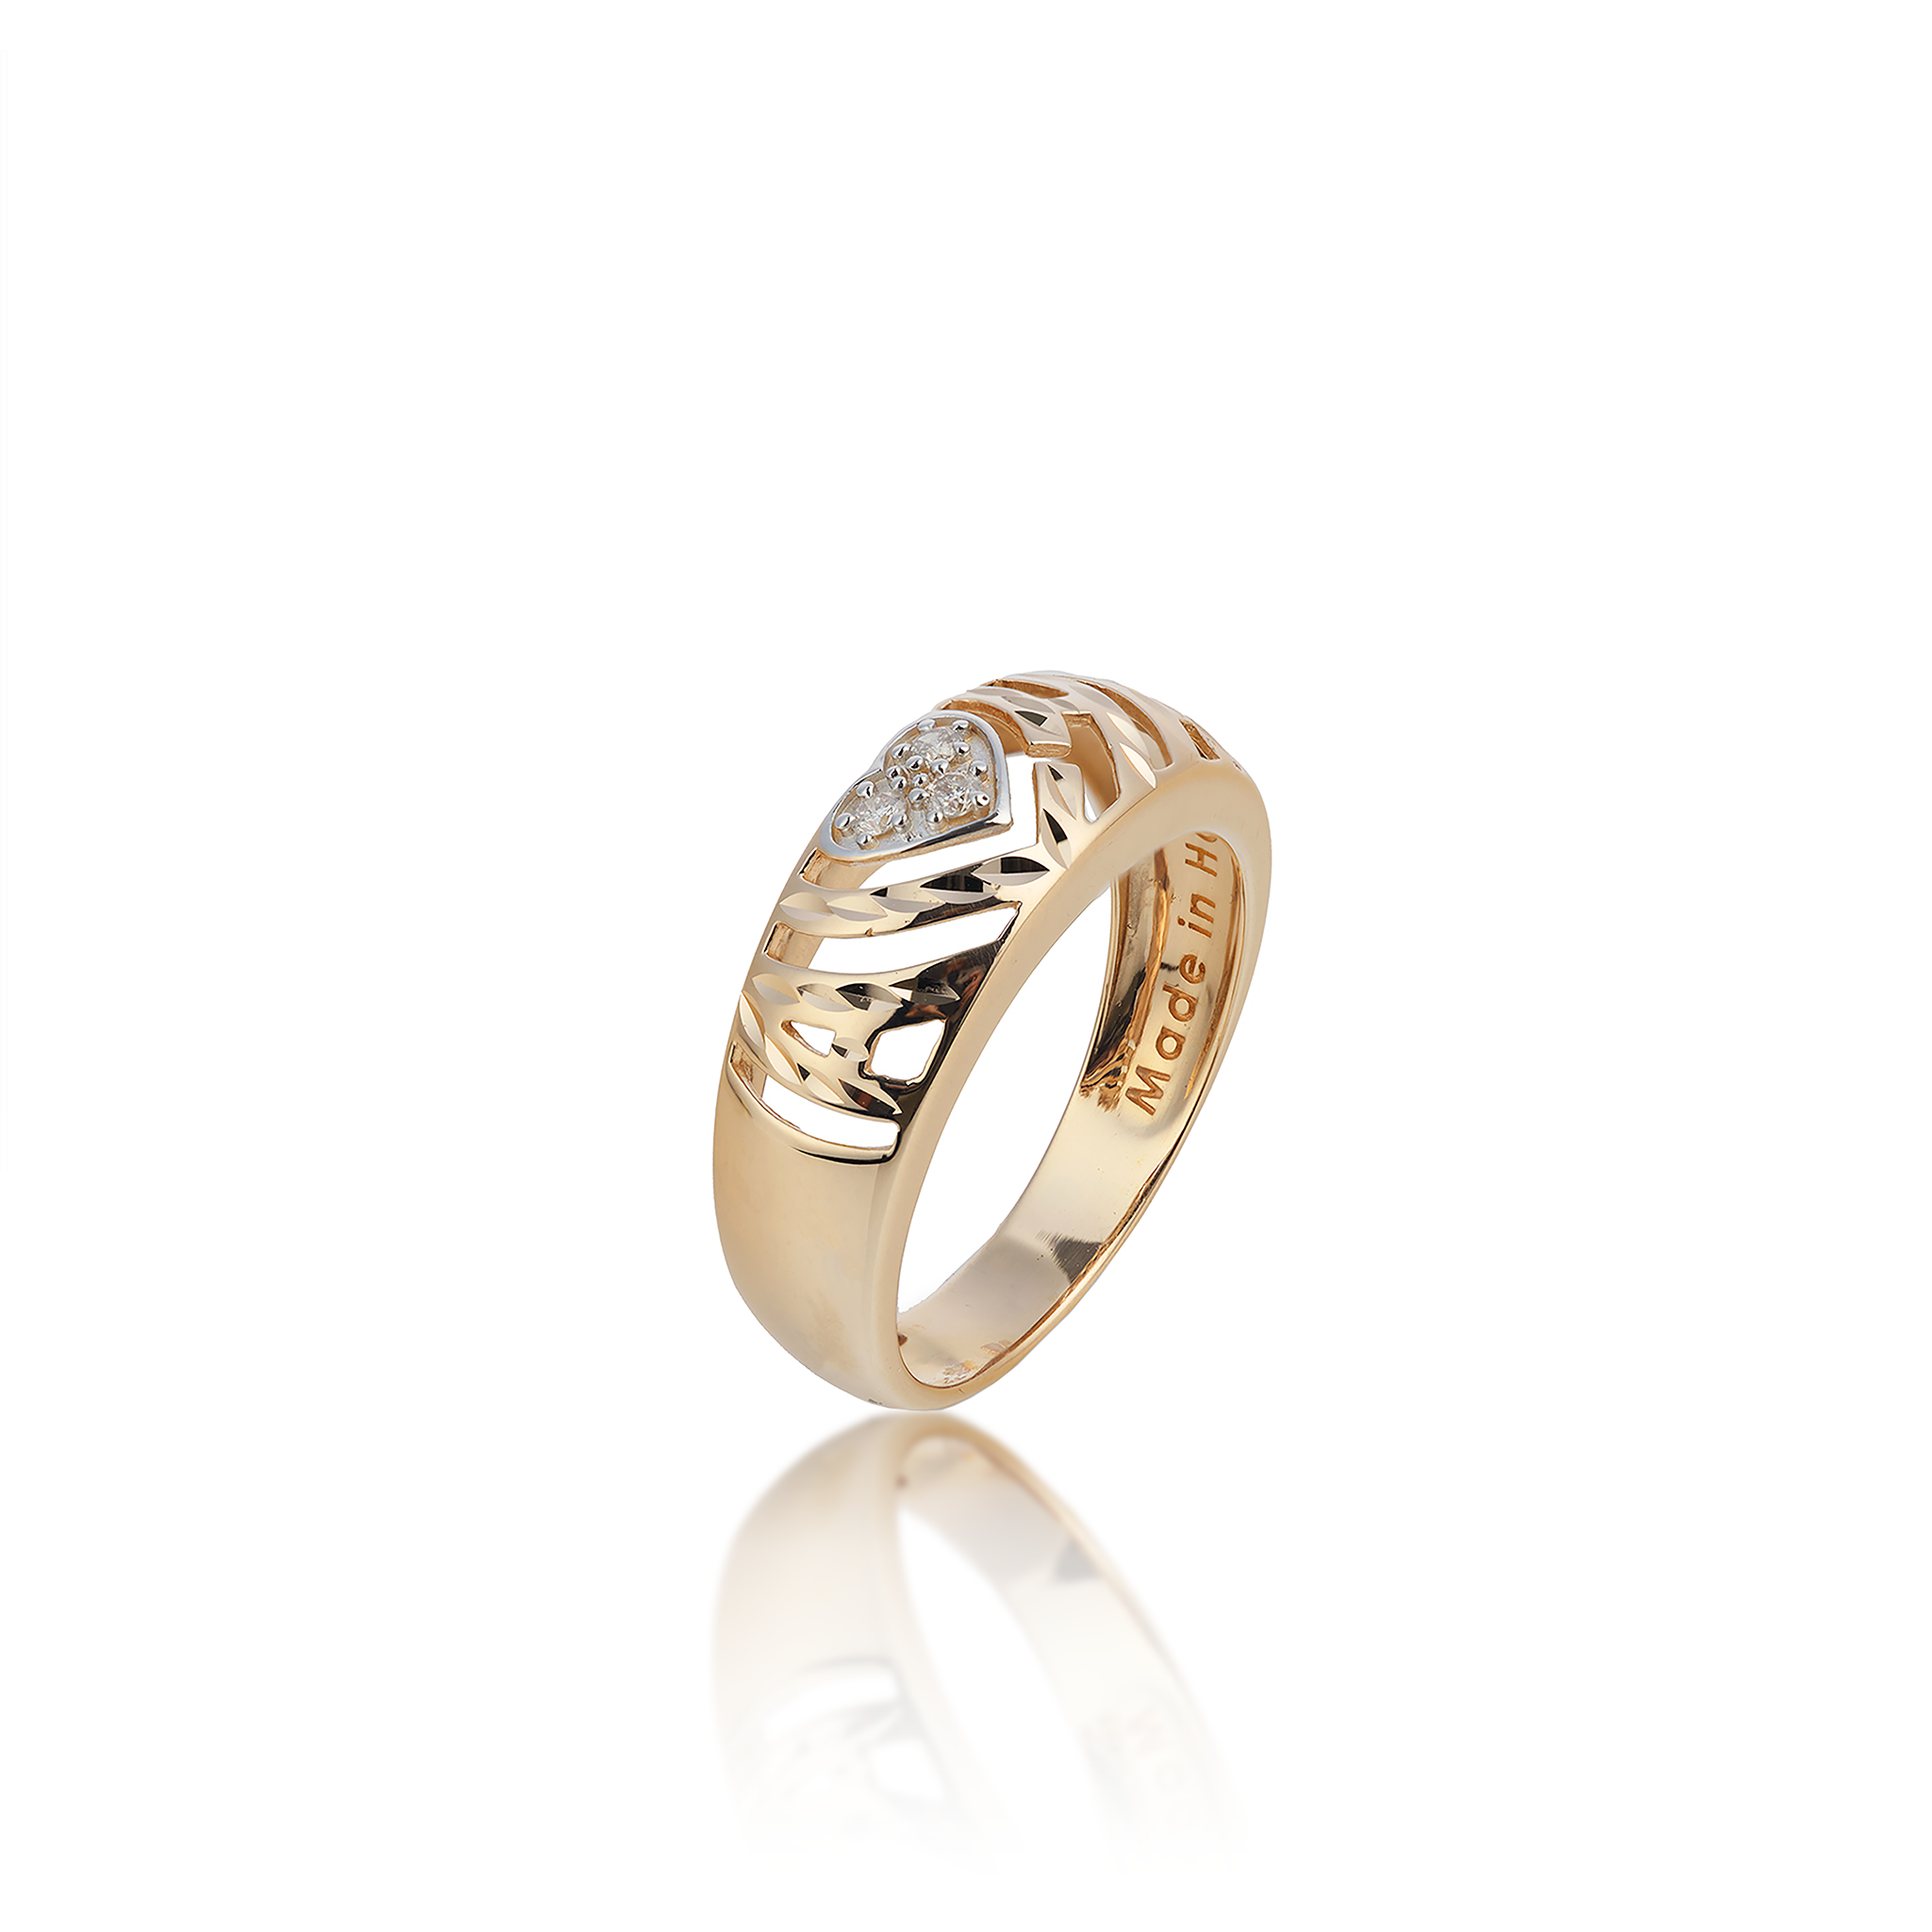 Aloha Heart Ring in Gold with Diamonds - 8mm